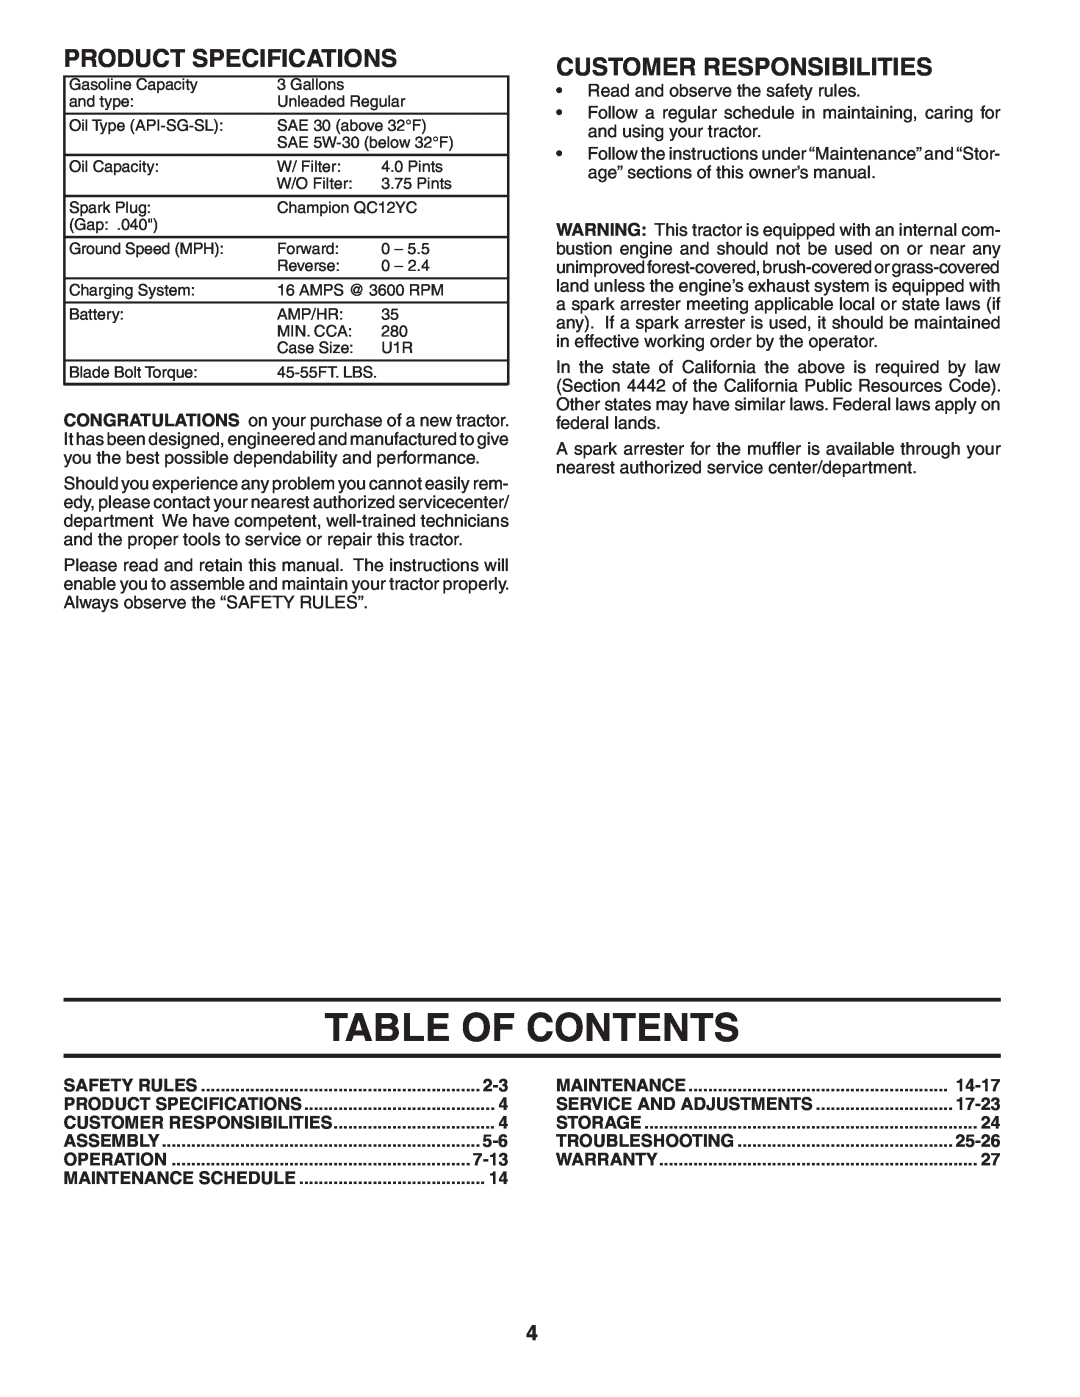 Poulan 404402, 960420022 Table Of Contents, Product Specifications, Customer Responsibilities, 7-13, 14-17, 17-23, 25-26 